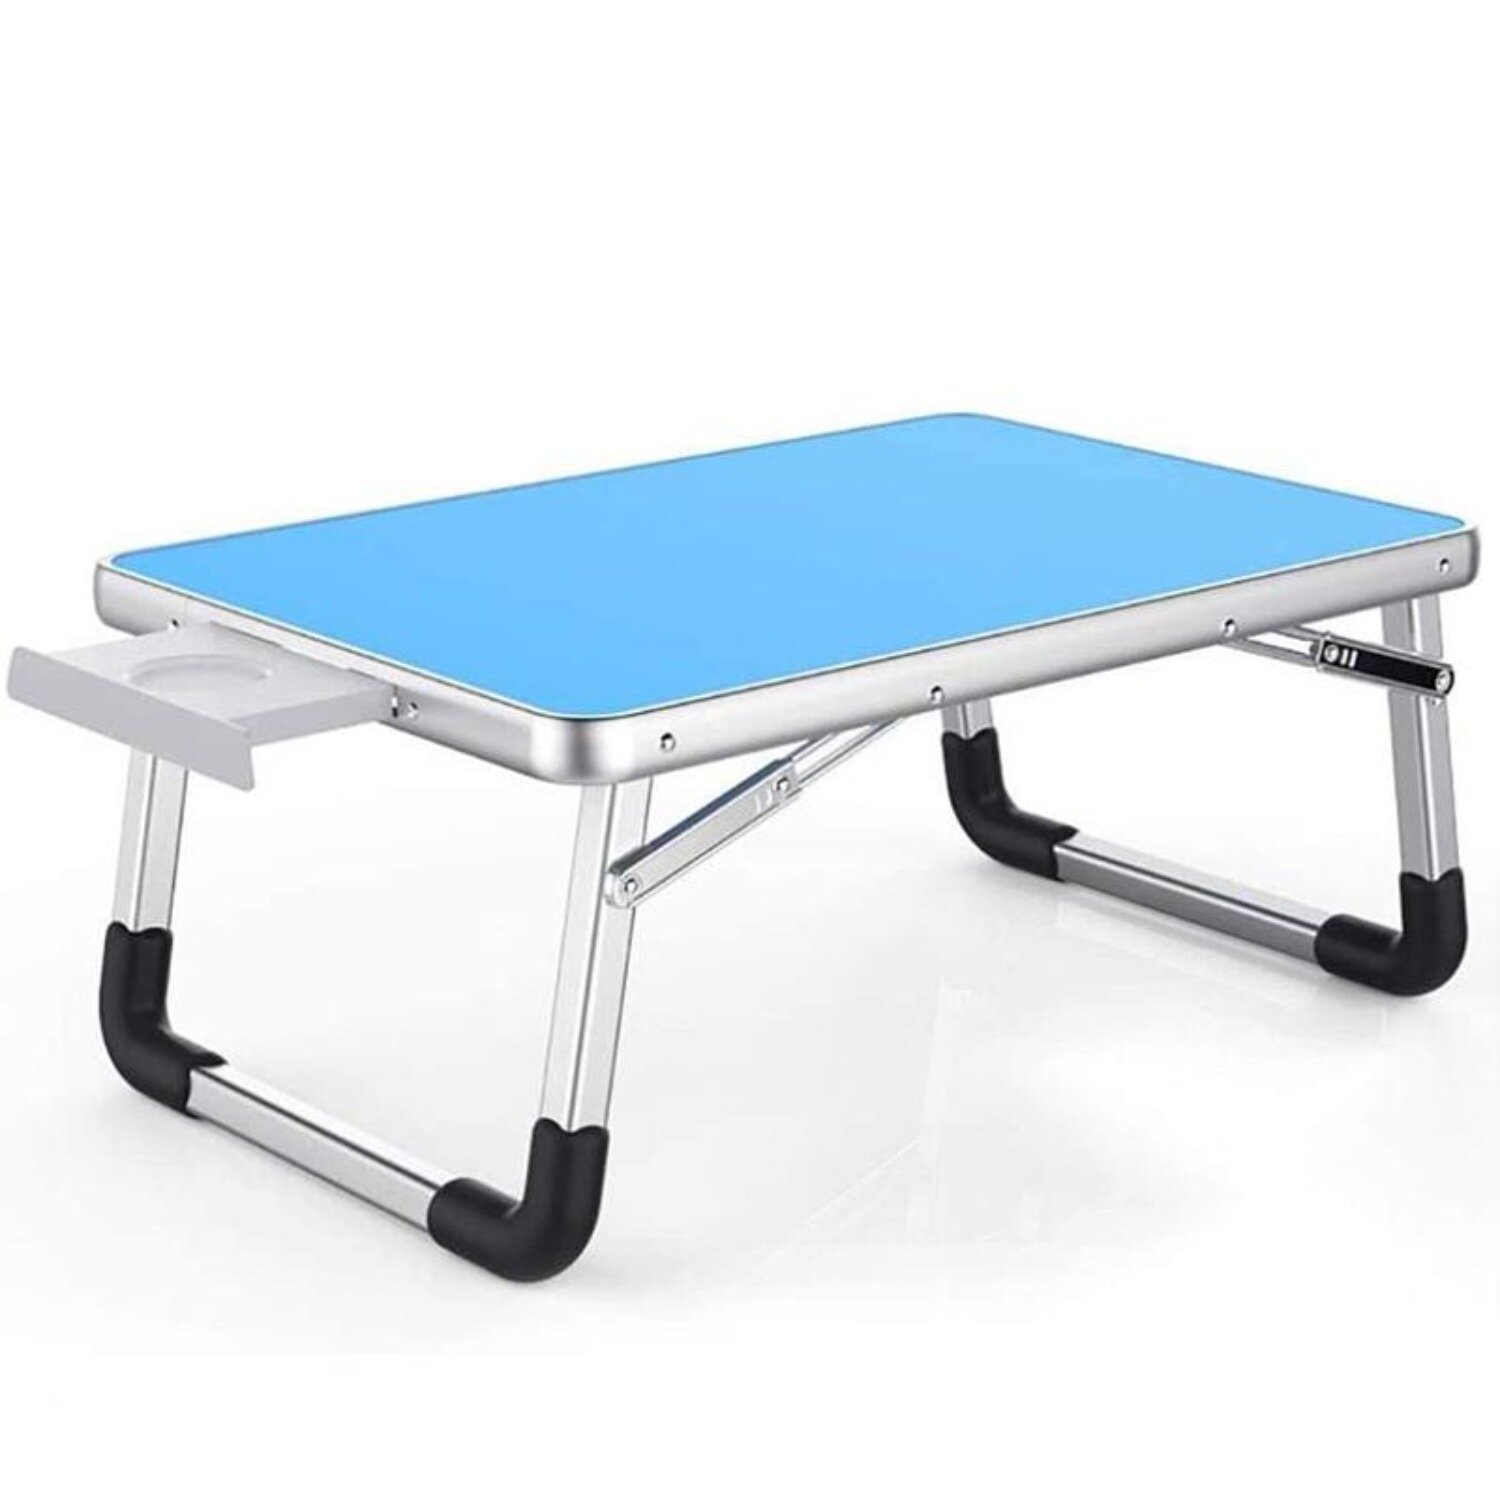 Writing Laptop Desk Bed Table Foldable Tray for Eating Drawing & Computing